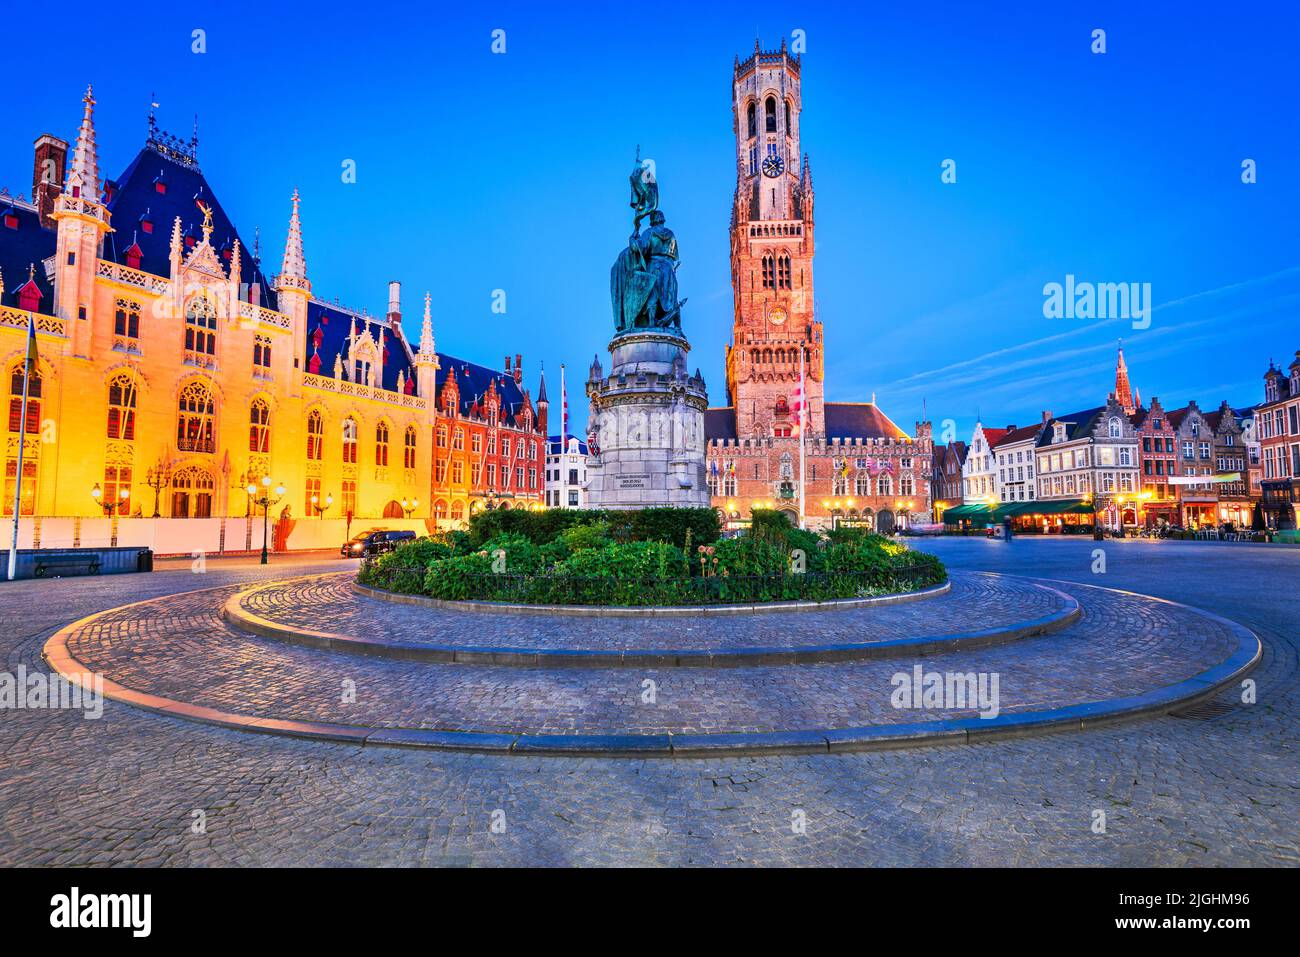 Bruges, Belgium. Blue hour landscape with famous Belfry tower and medieval buildings in Grote Markt, Flanders. Stock Photo